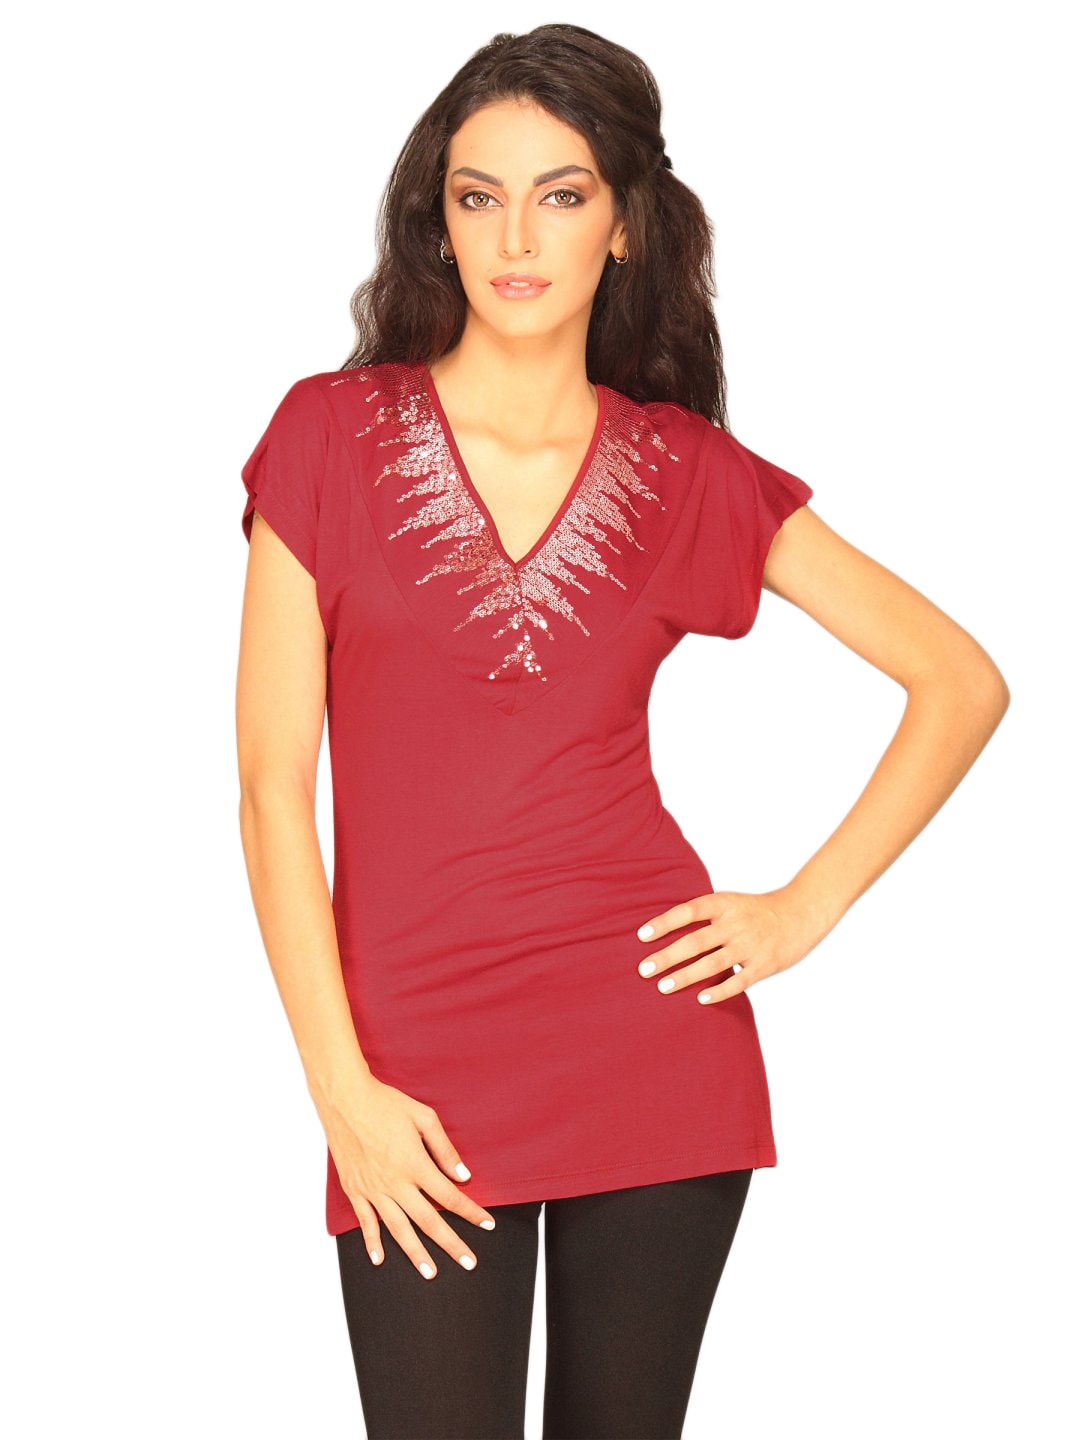 Jealous 21 Women V Neck Sequined Red Top